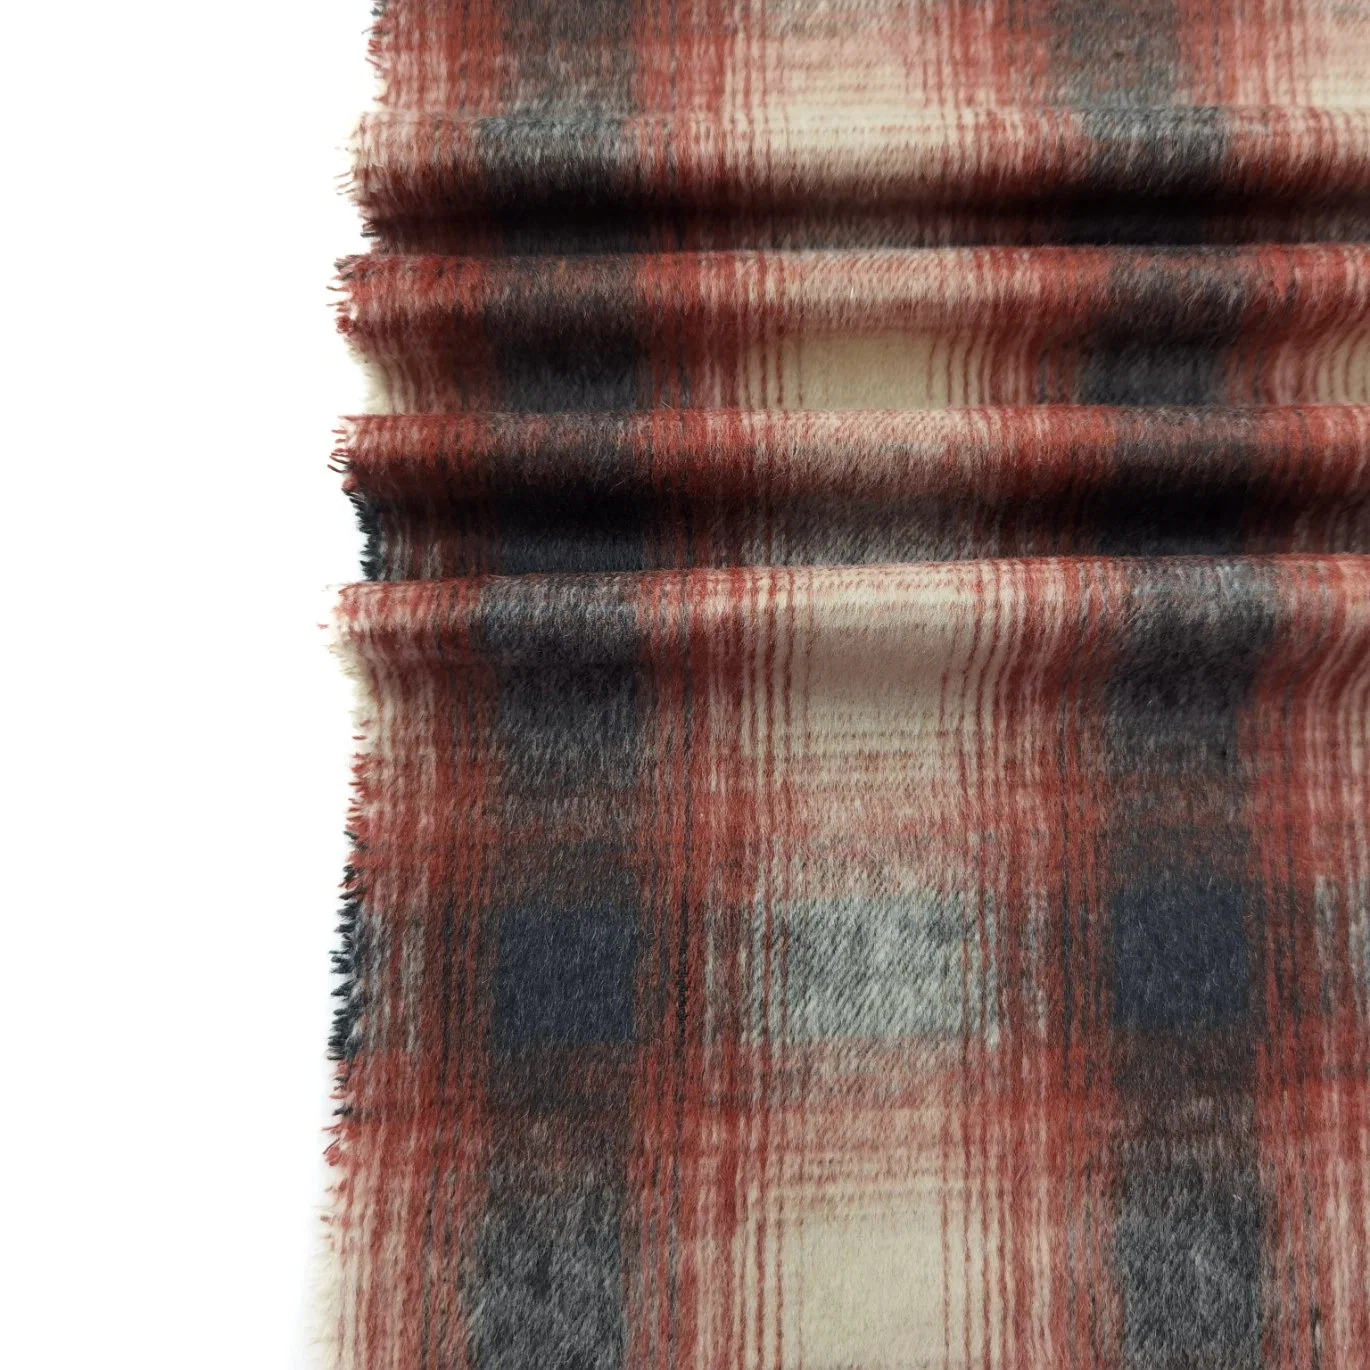 Home Textile Check Plaid Brushed 100% Polyester Tweed Fabric for Clothing Shirt